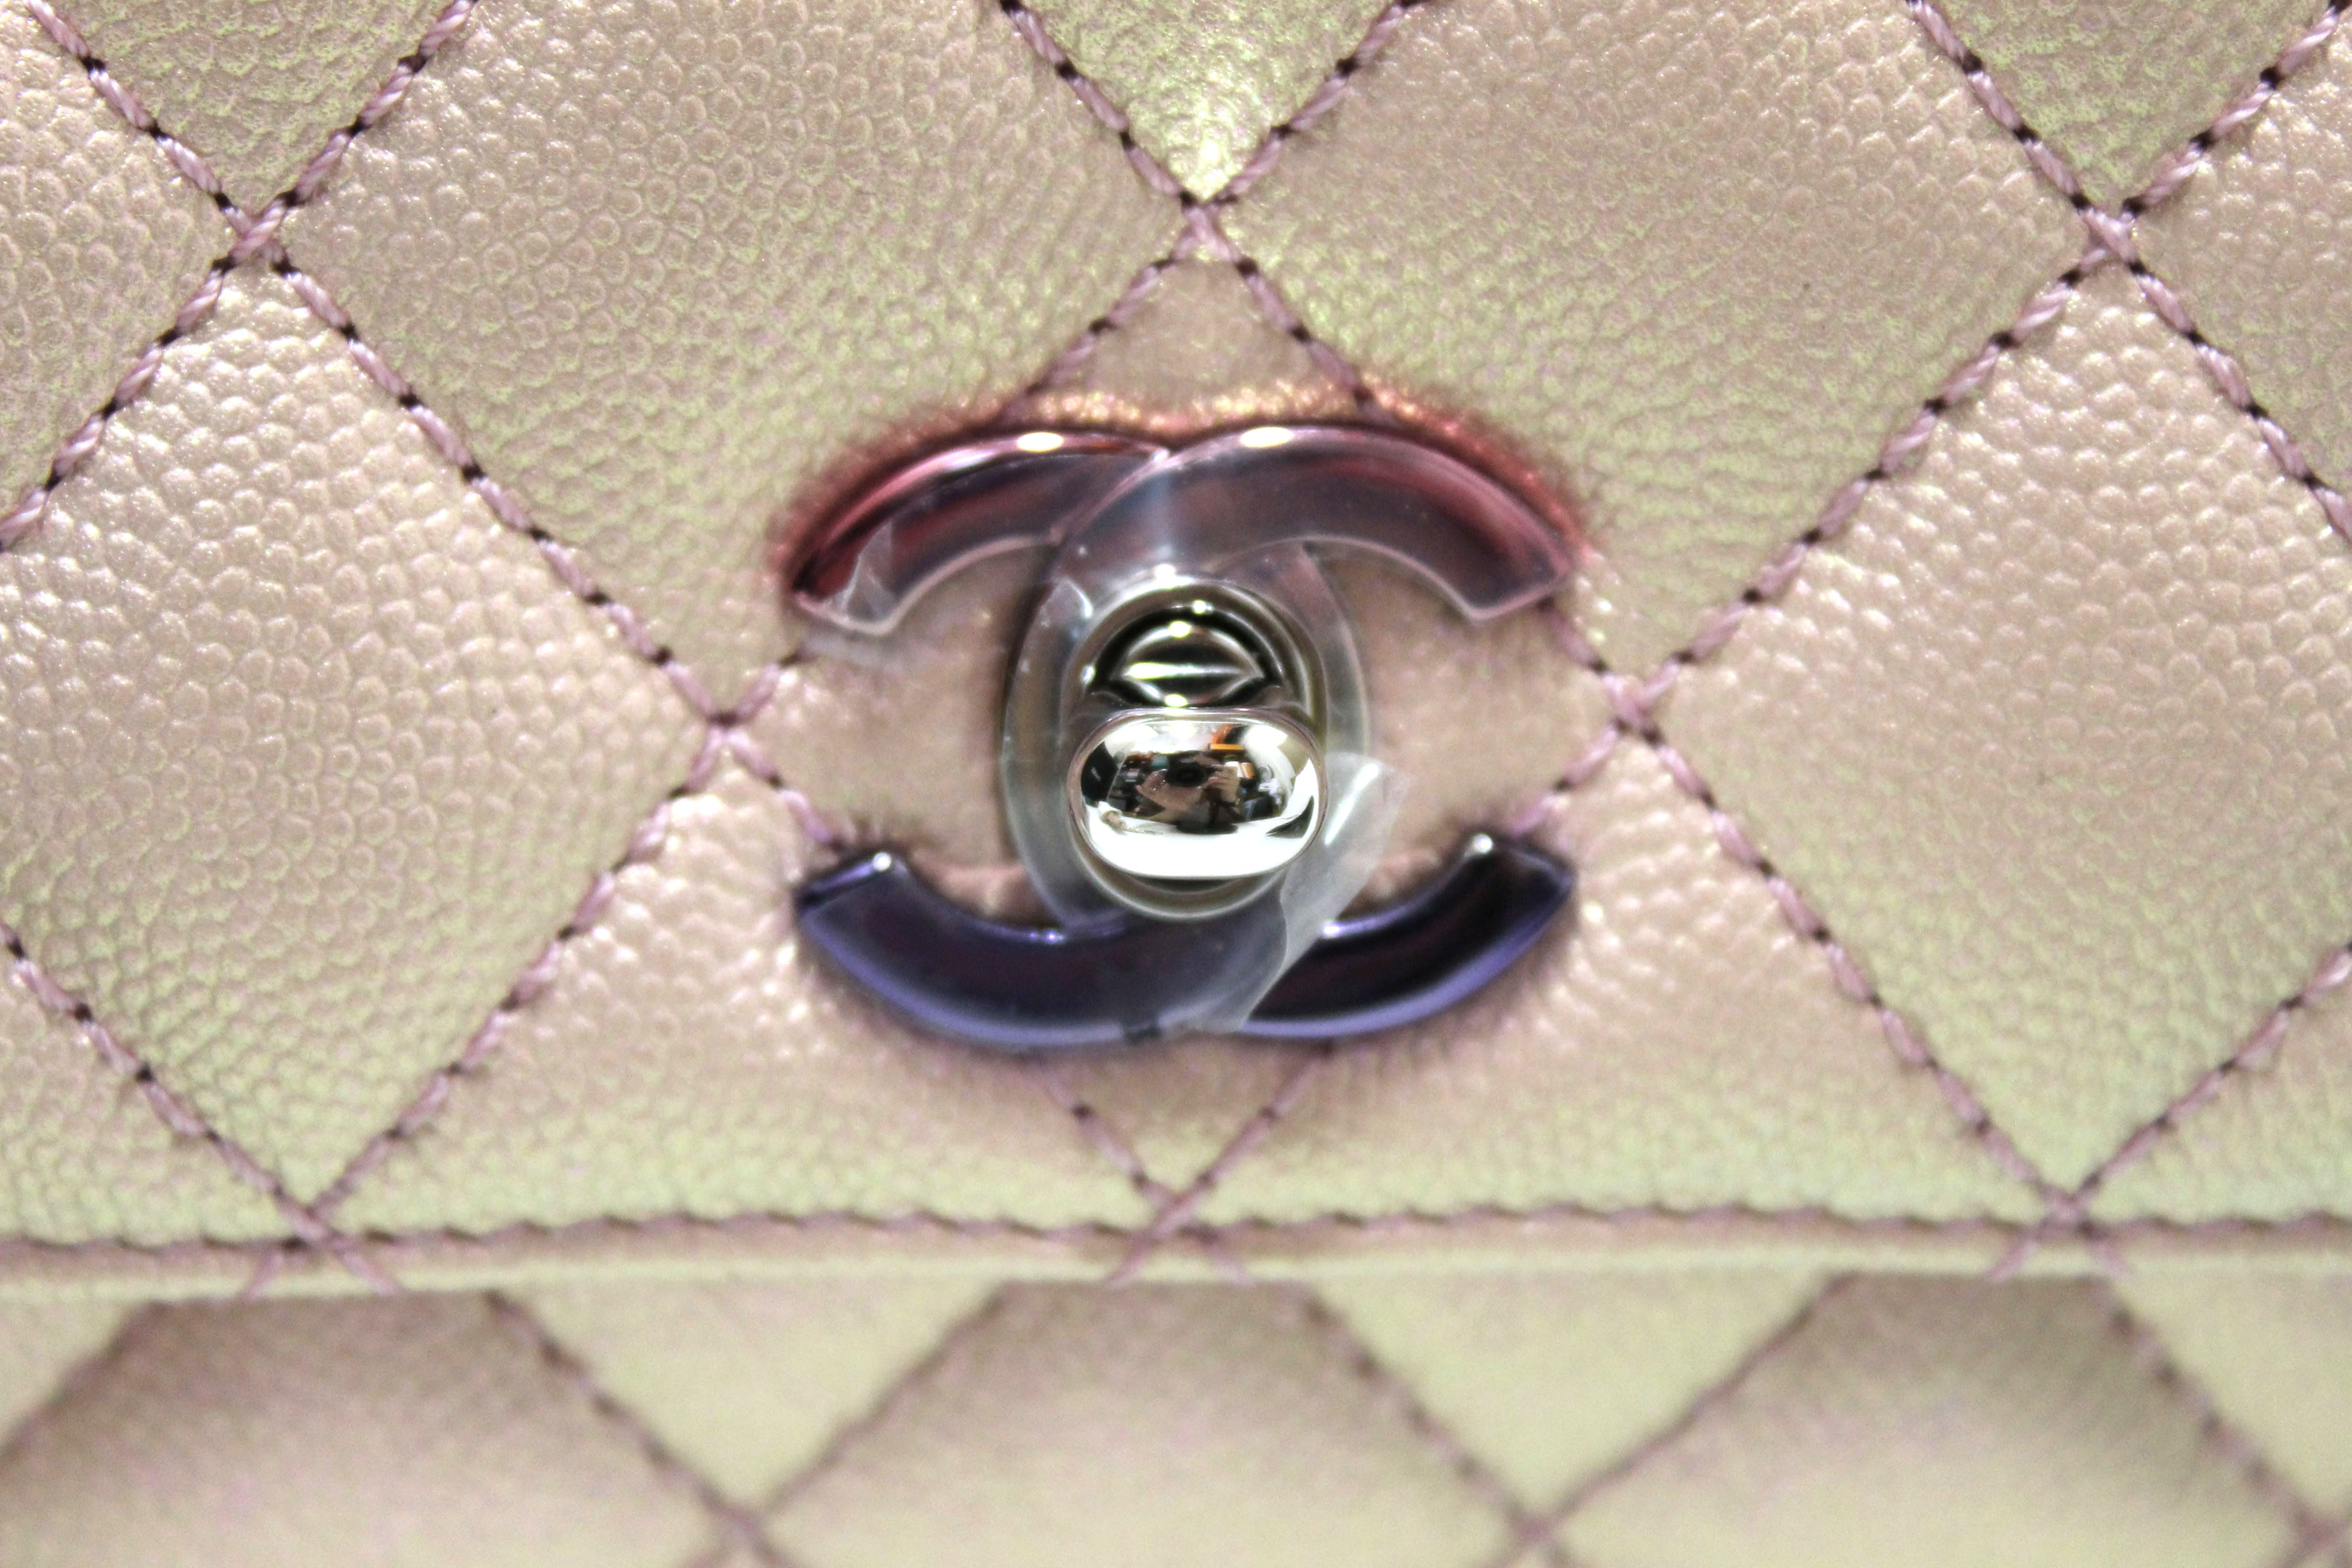 Authentic NEW Chanel Iridescent Light Pink Quilted Caviar Leather Extra Mini Coco Handle Flap Bag